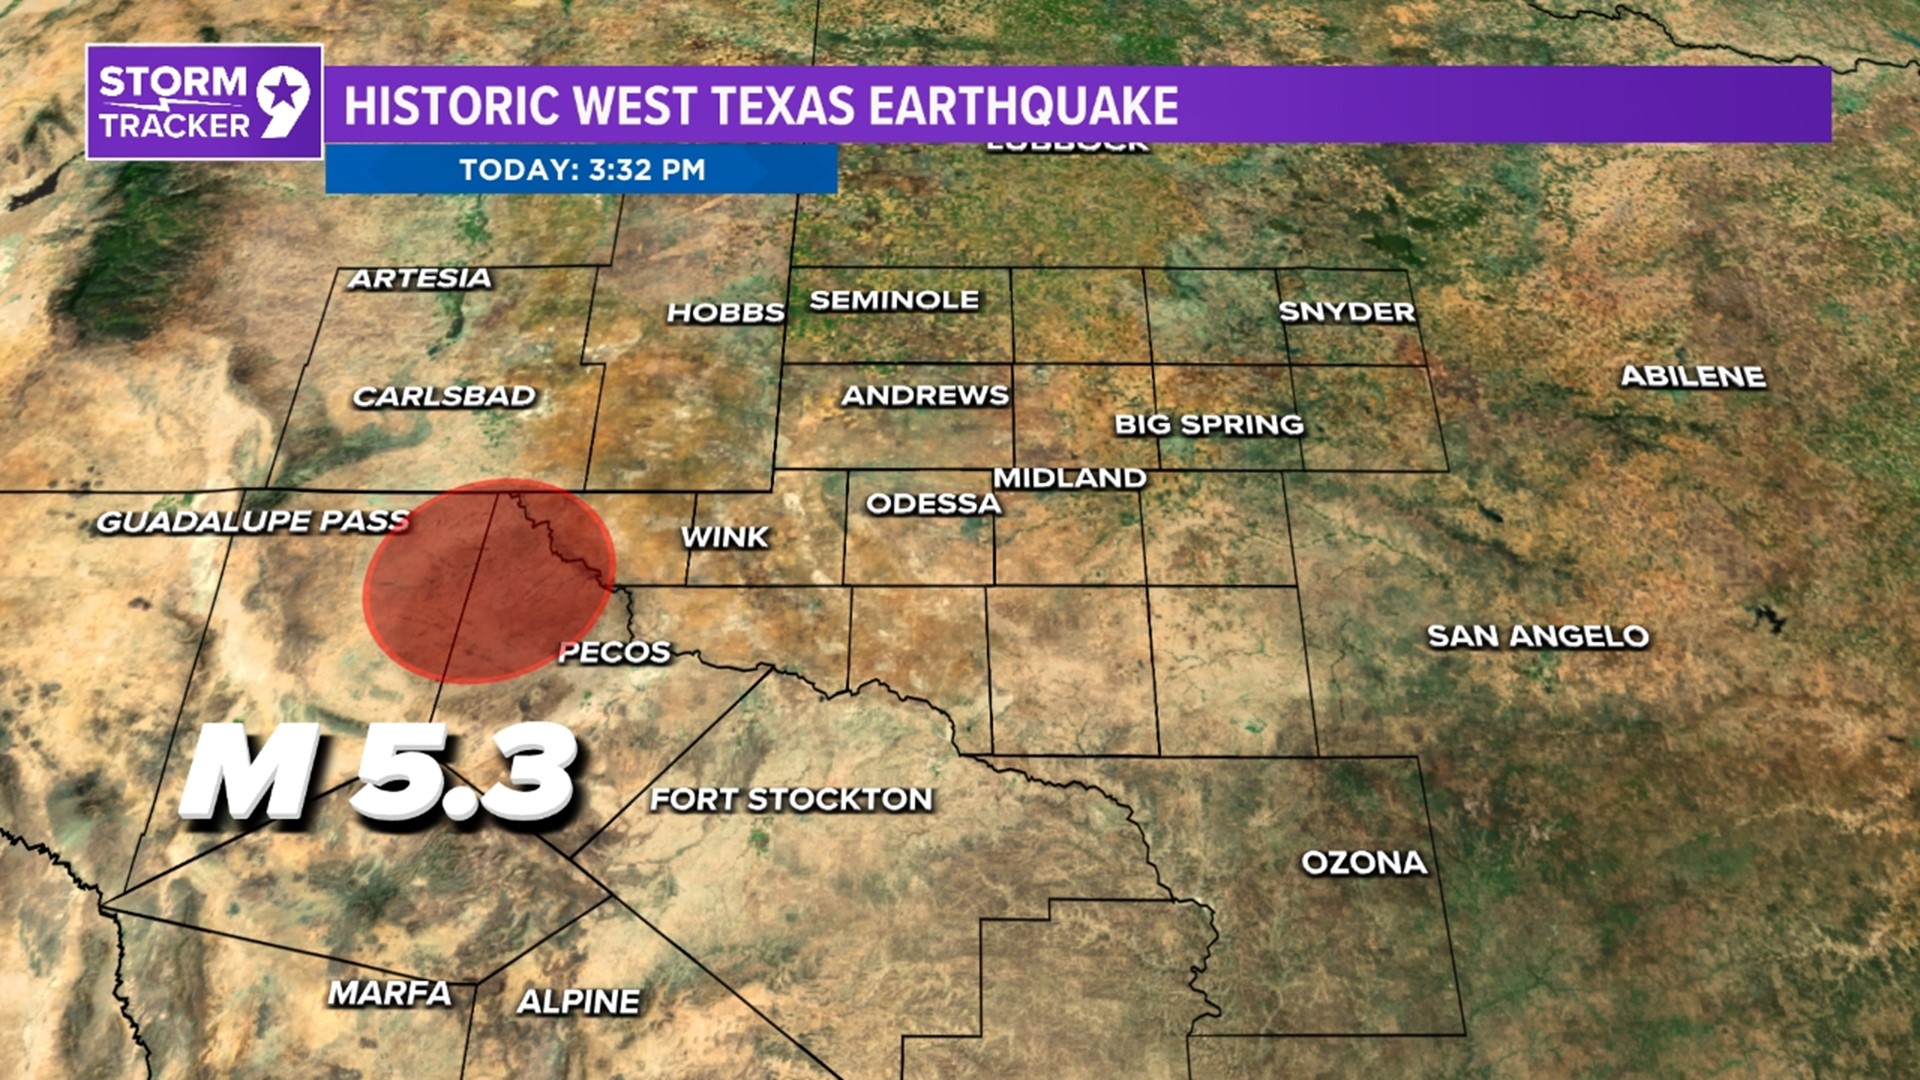 This is the third strongest earthquake ever to strike Texas, and the strongest since 1995.